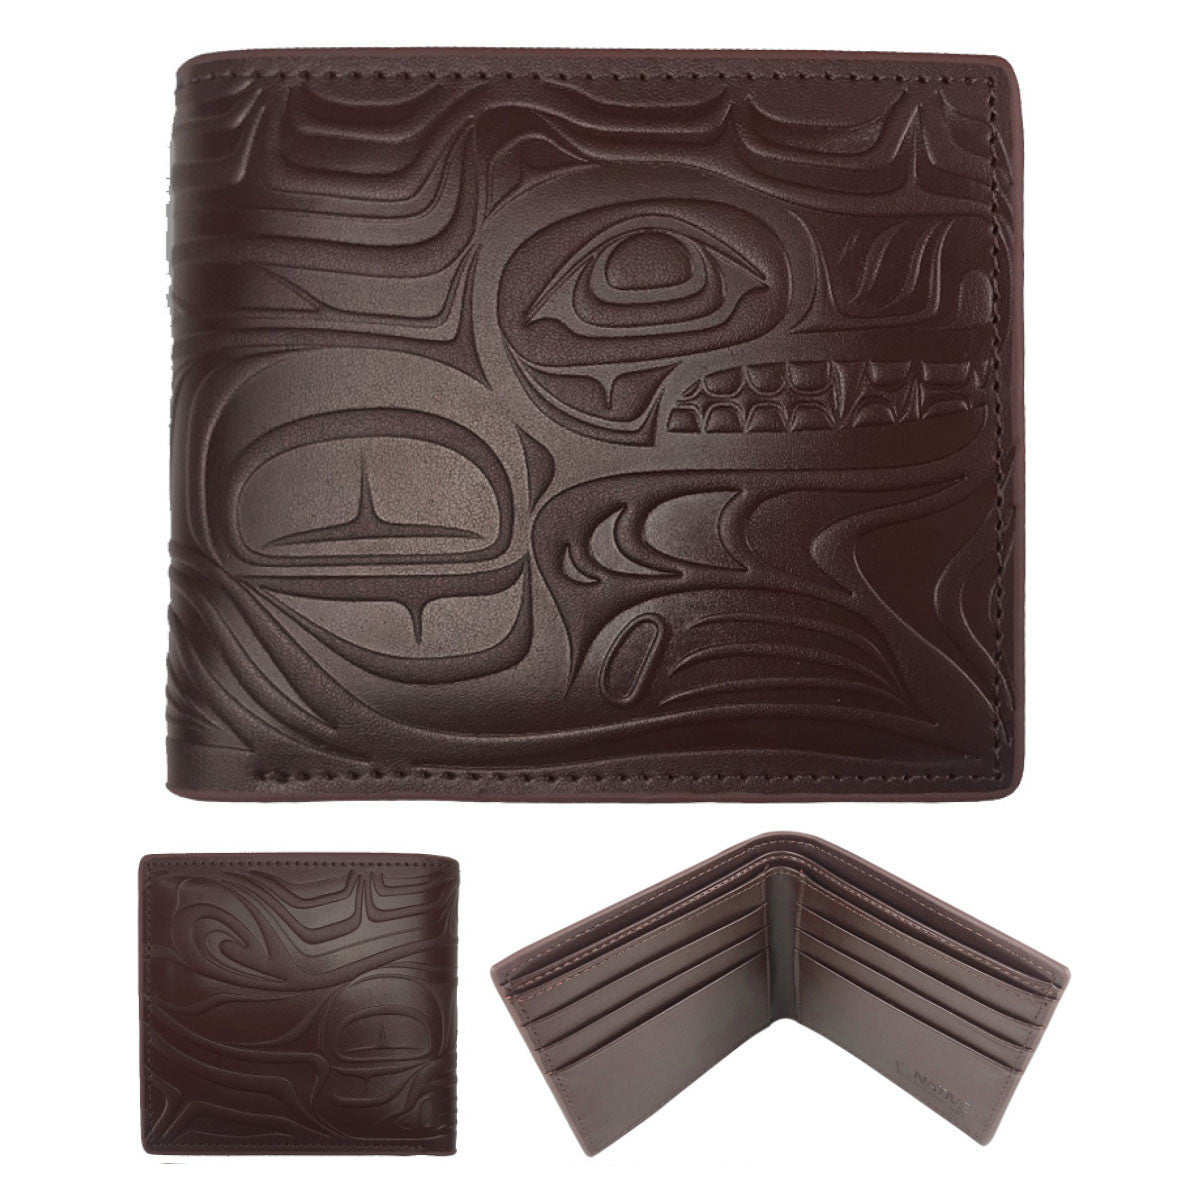 Spirit Wolf Embossed Leather Wallet